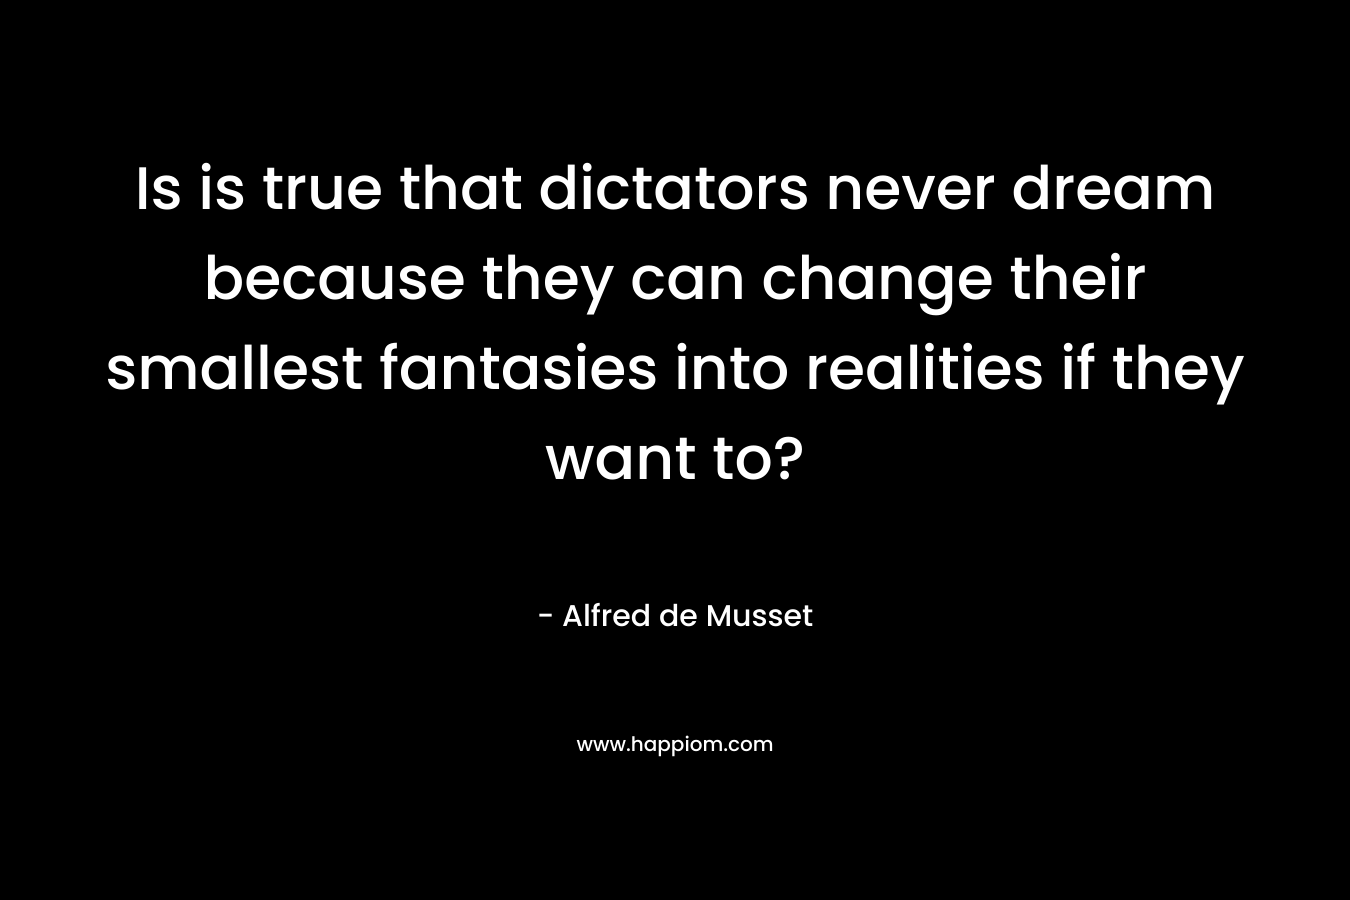 Is is true that dictators never dream because they can change their smallest fantasies into realities if they want to? – Alfred de Musset